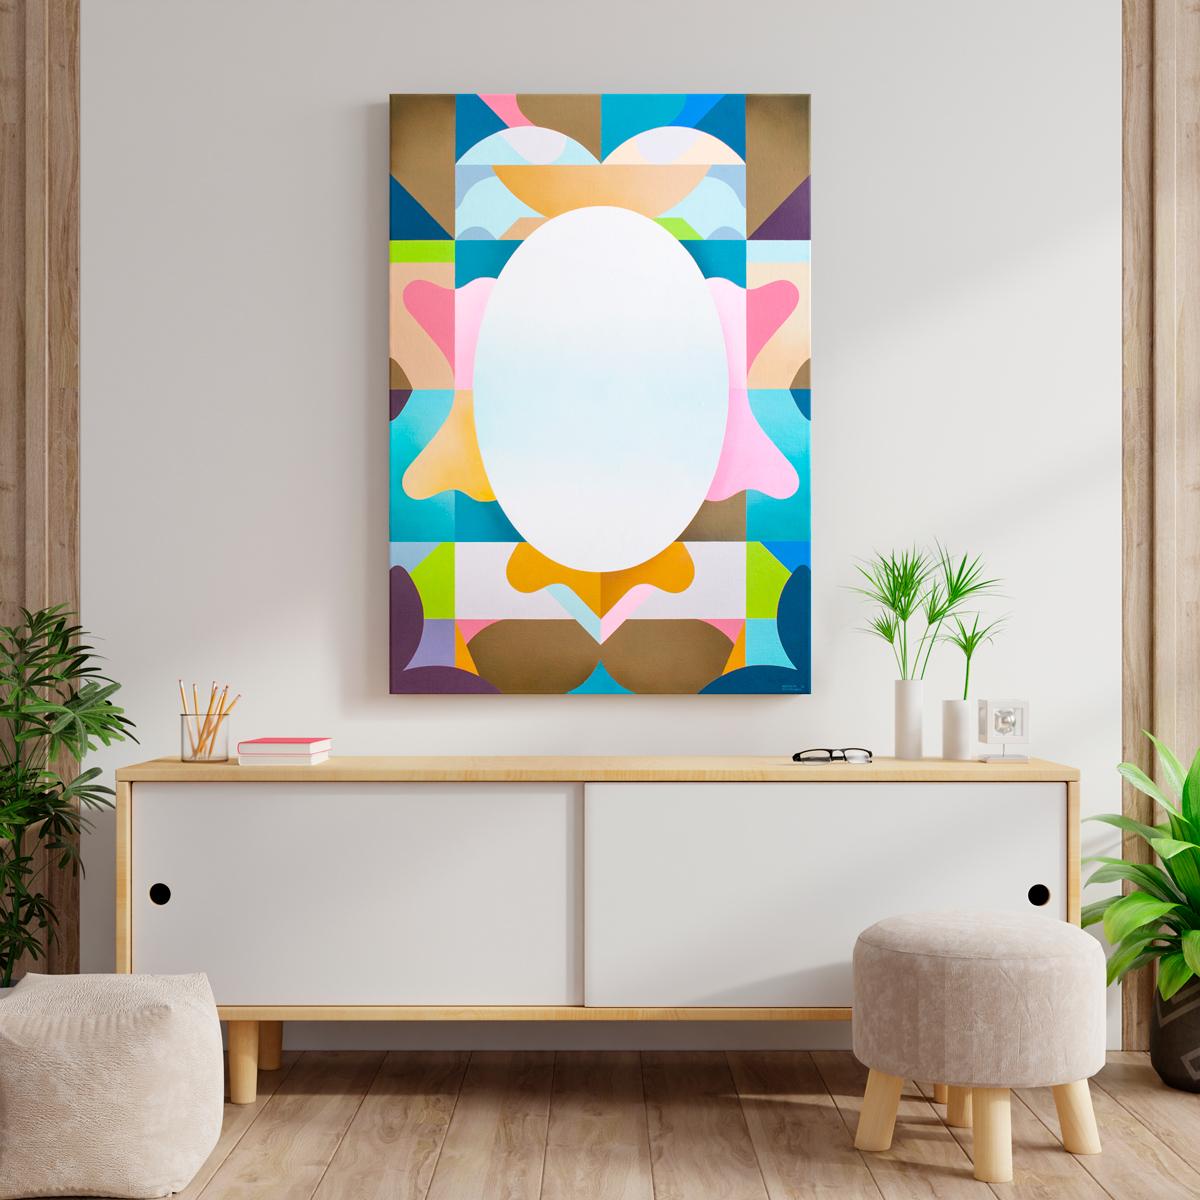 Who Are You? - Geometric Abstract Painting, Acrylic on Canvas, made in France For Sale 1